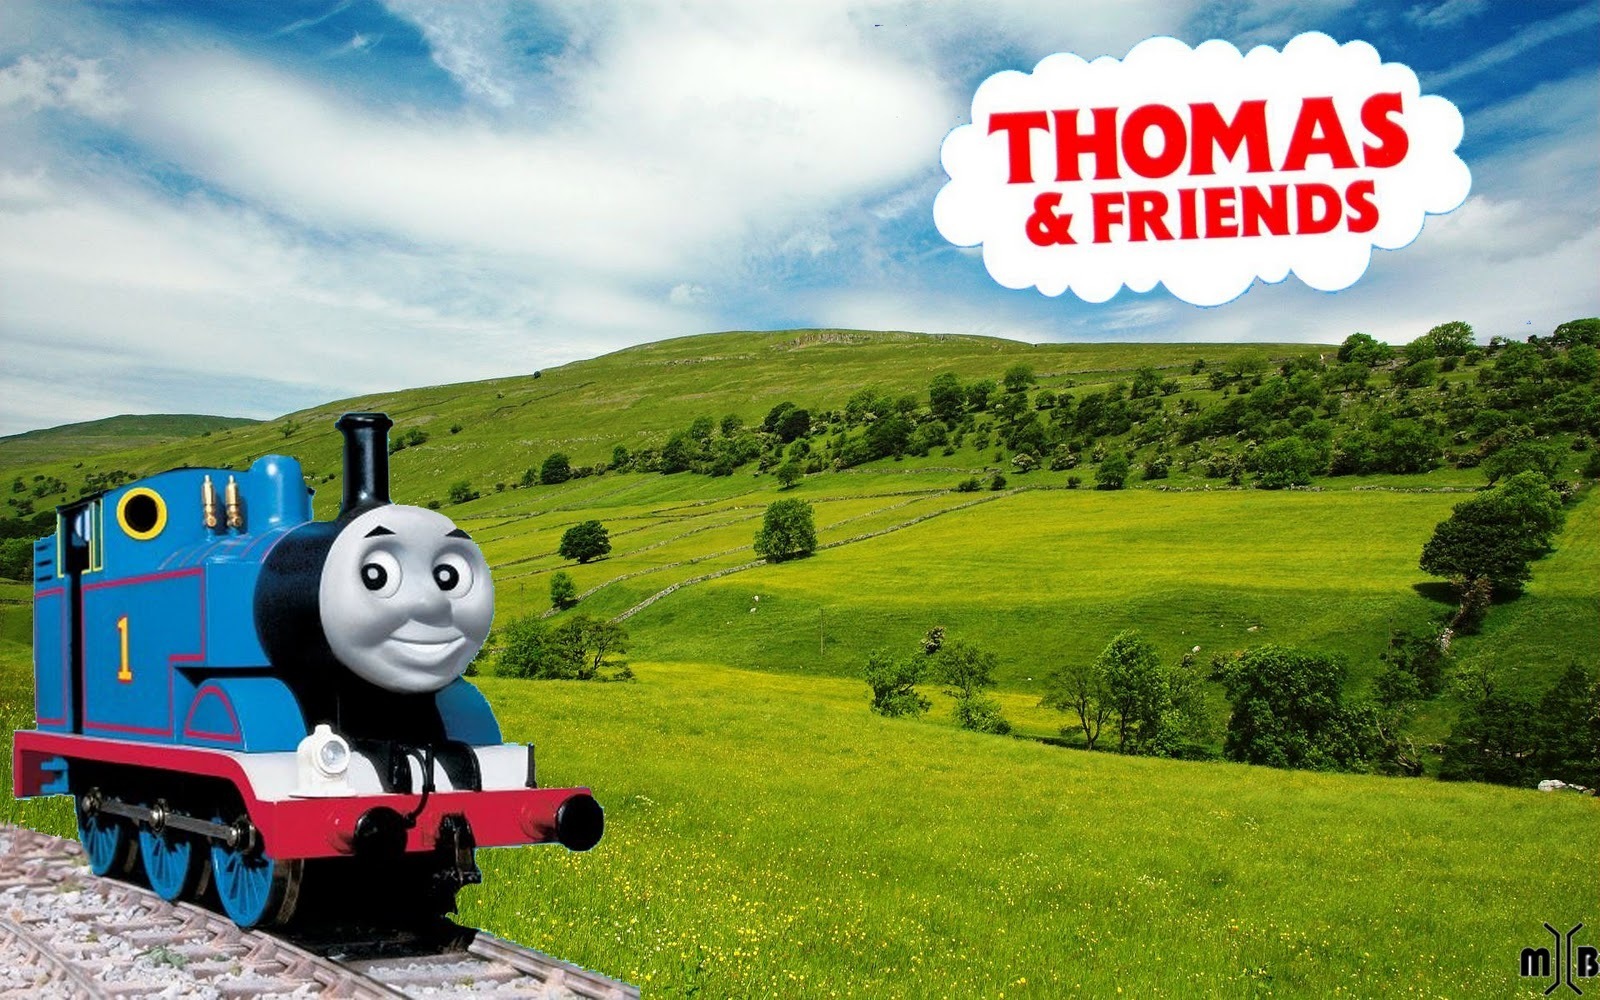 Thomas And Friends Wallpaper - Thomas And Friends Wallpaper